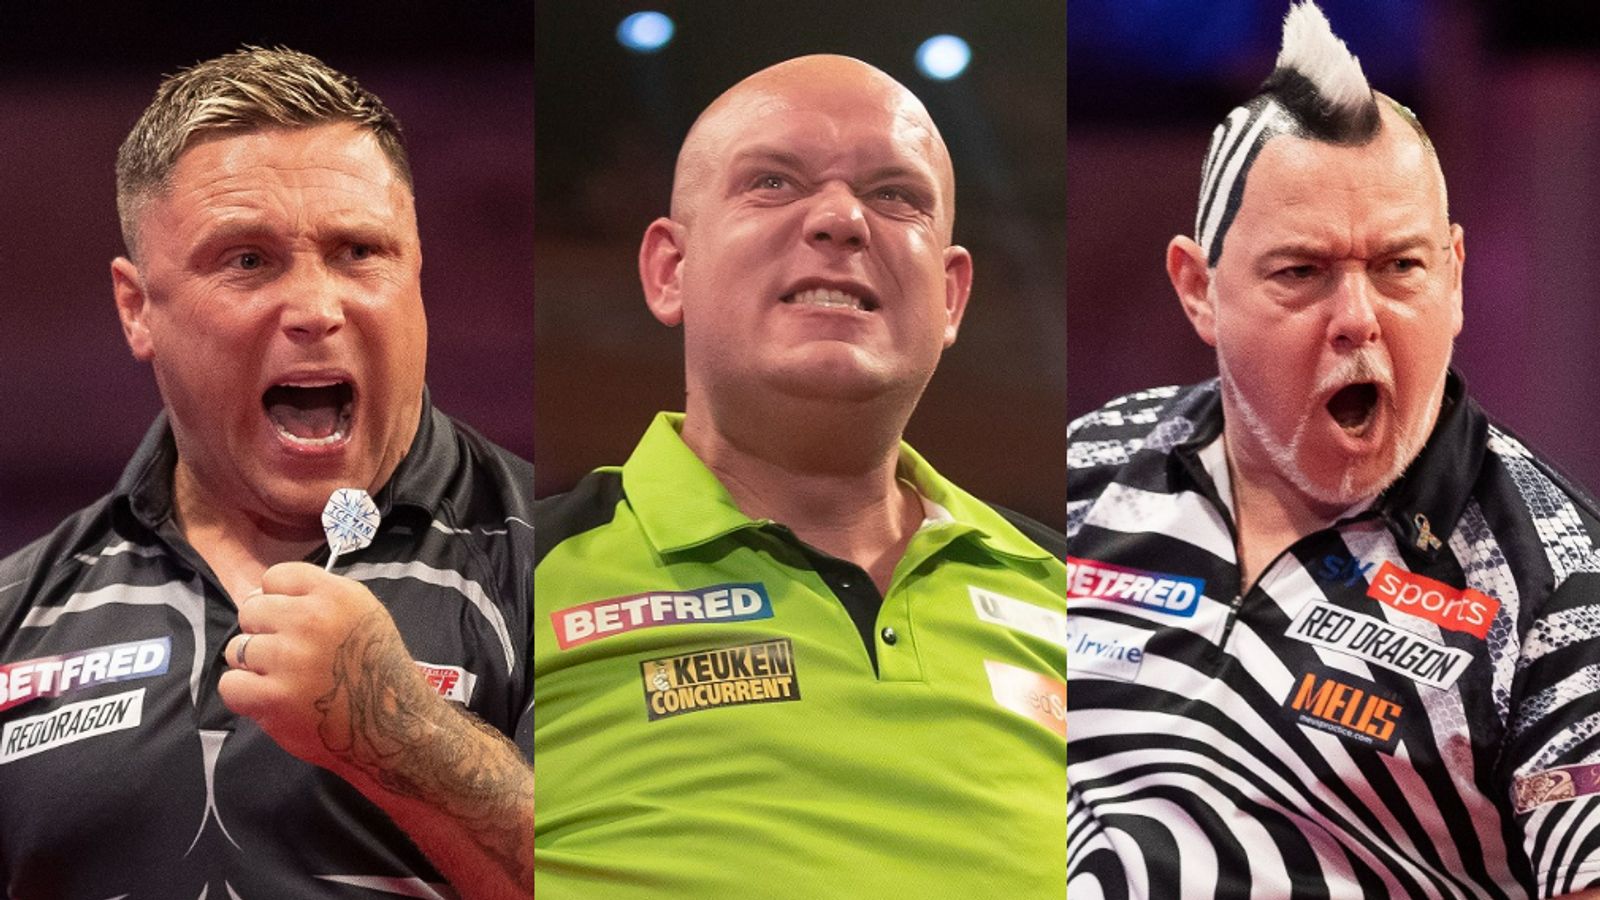 Love The Darts: Why the verbal sparring between Michael van Gerwen, Peter Wright and Gerwyn Price is good for darts